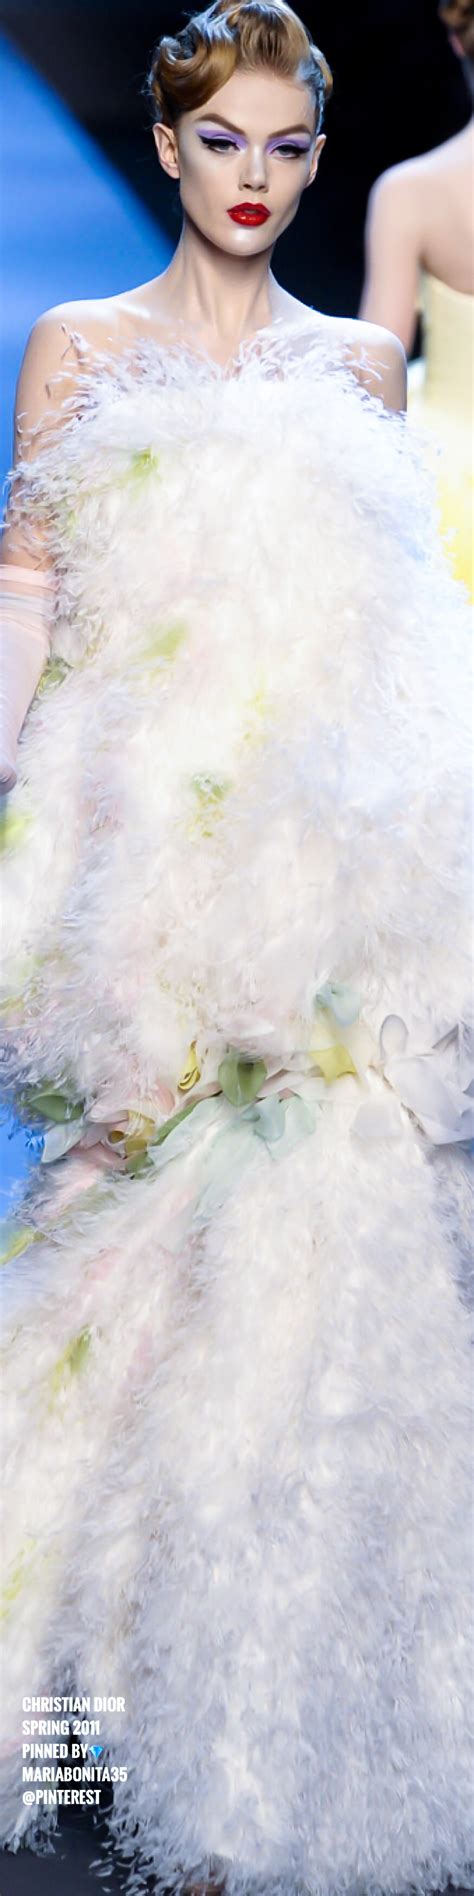 Christian Dior Spring 2011 Couture Dior Couture Couture Fashion